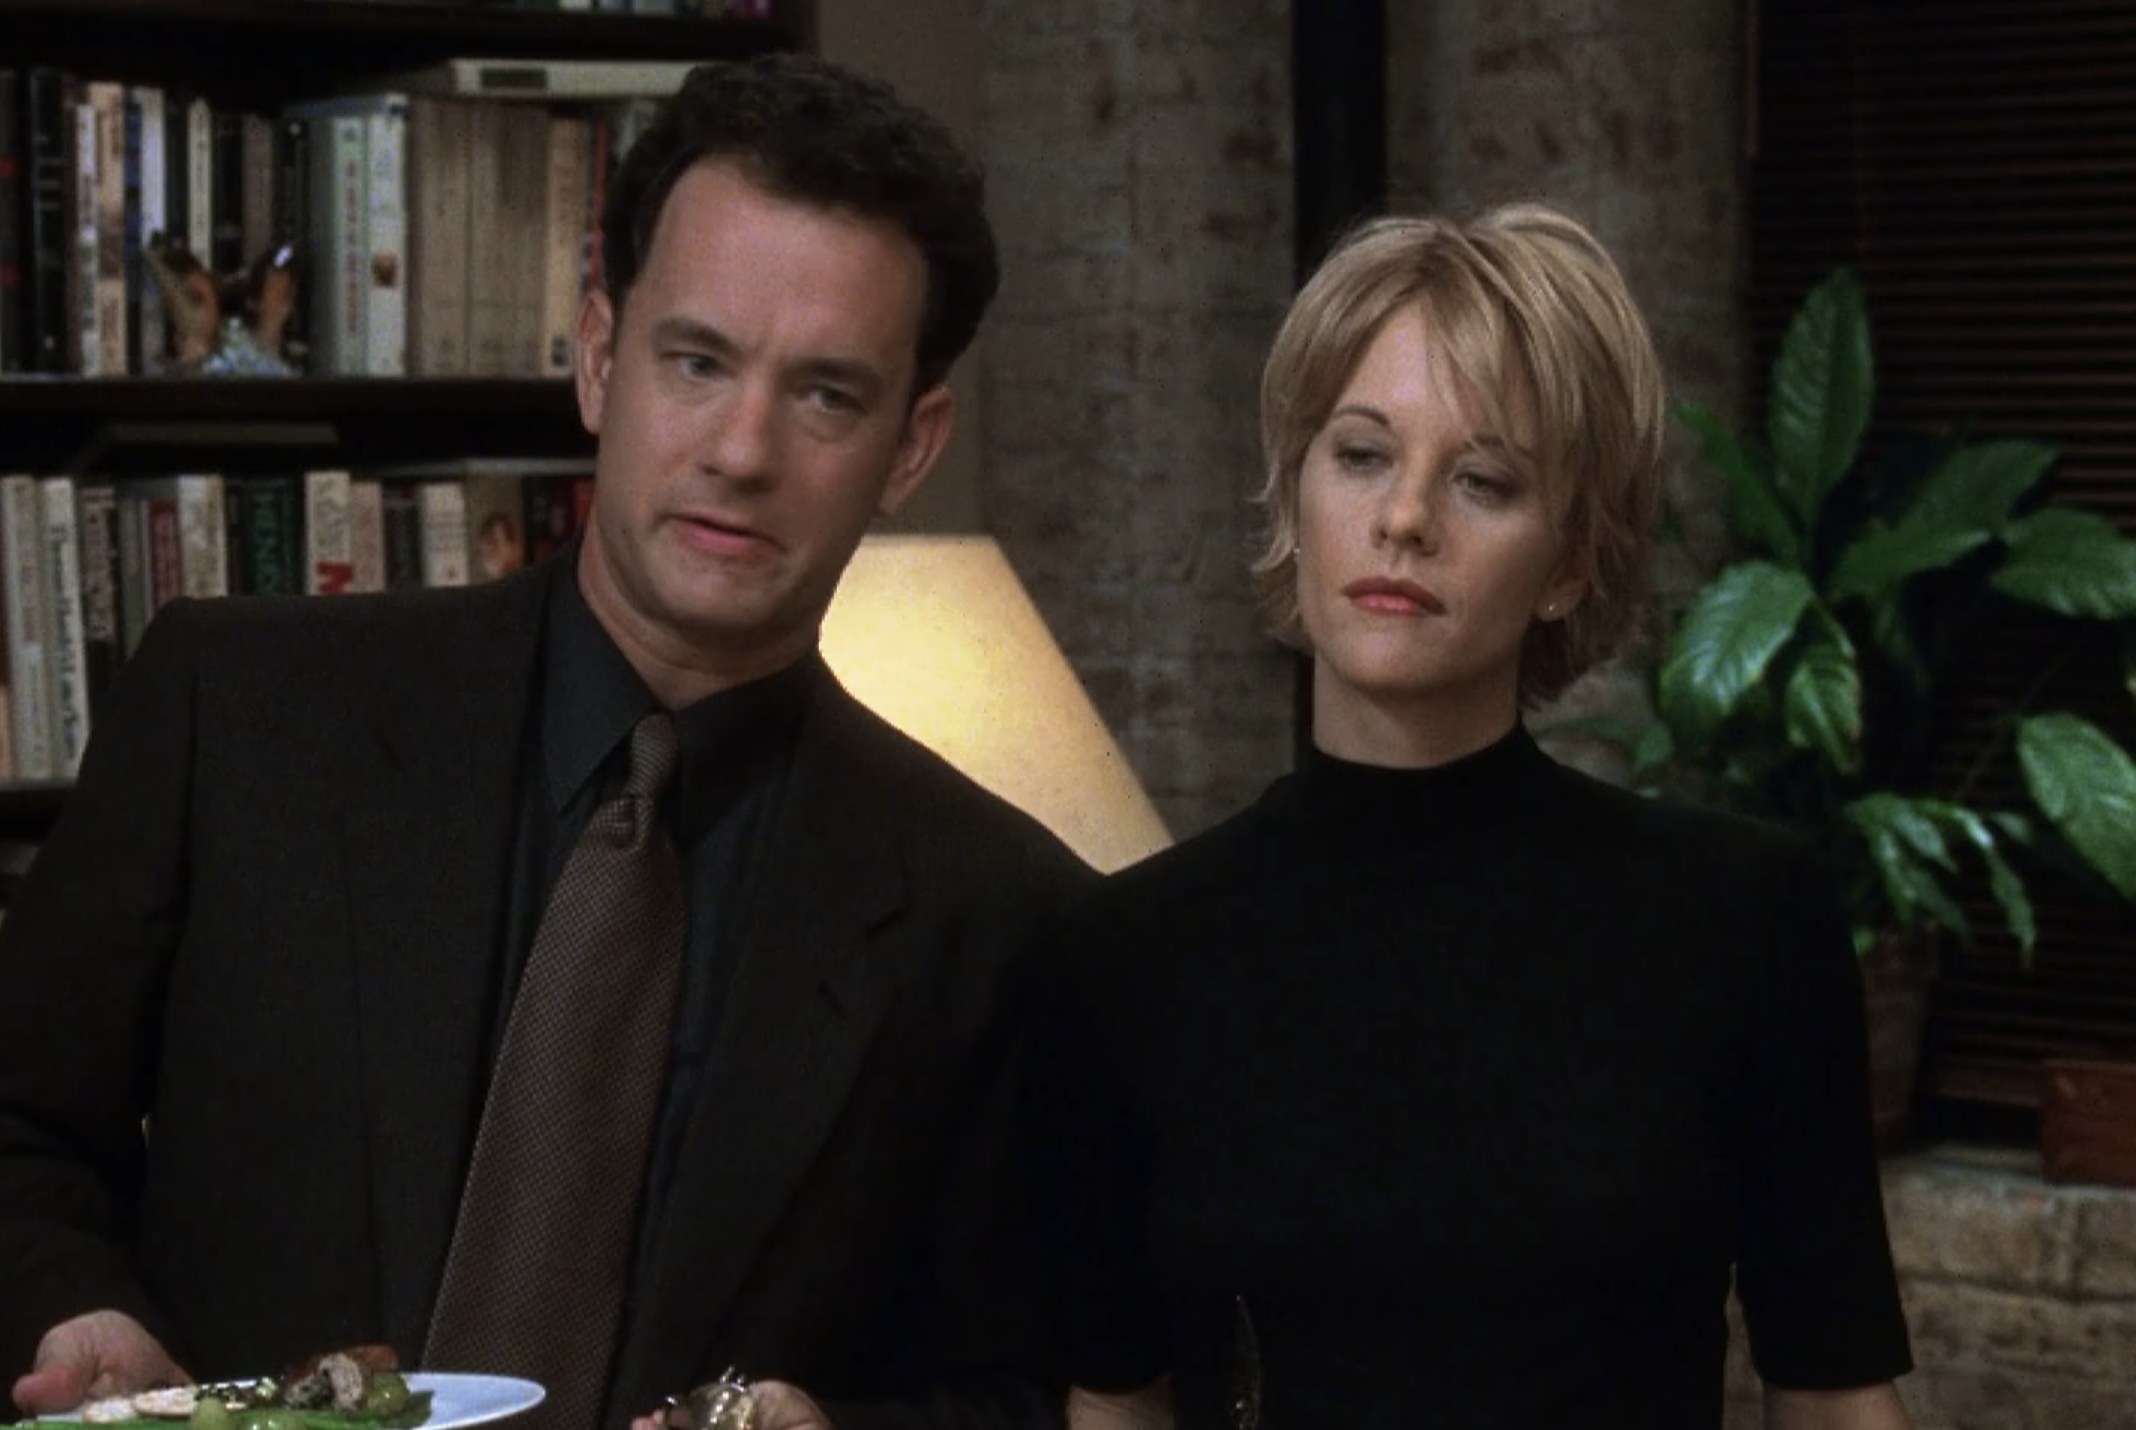 Actors Tom Hanks and Meg Ryan stand next to each other but look ahead. Hanks has a plate of food in his hand.